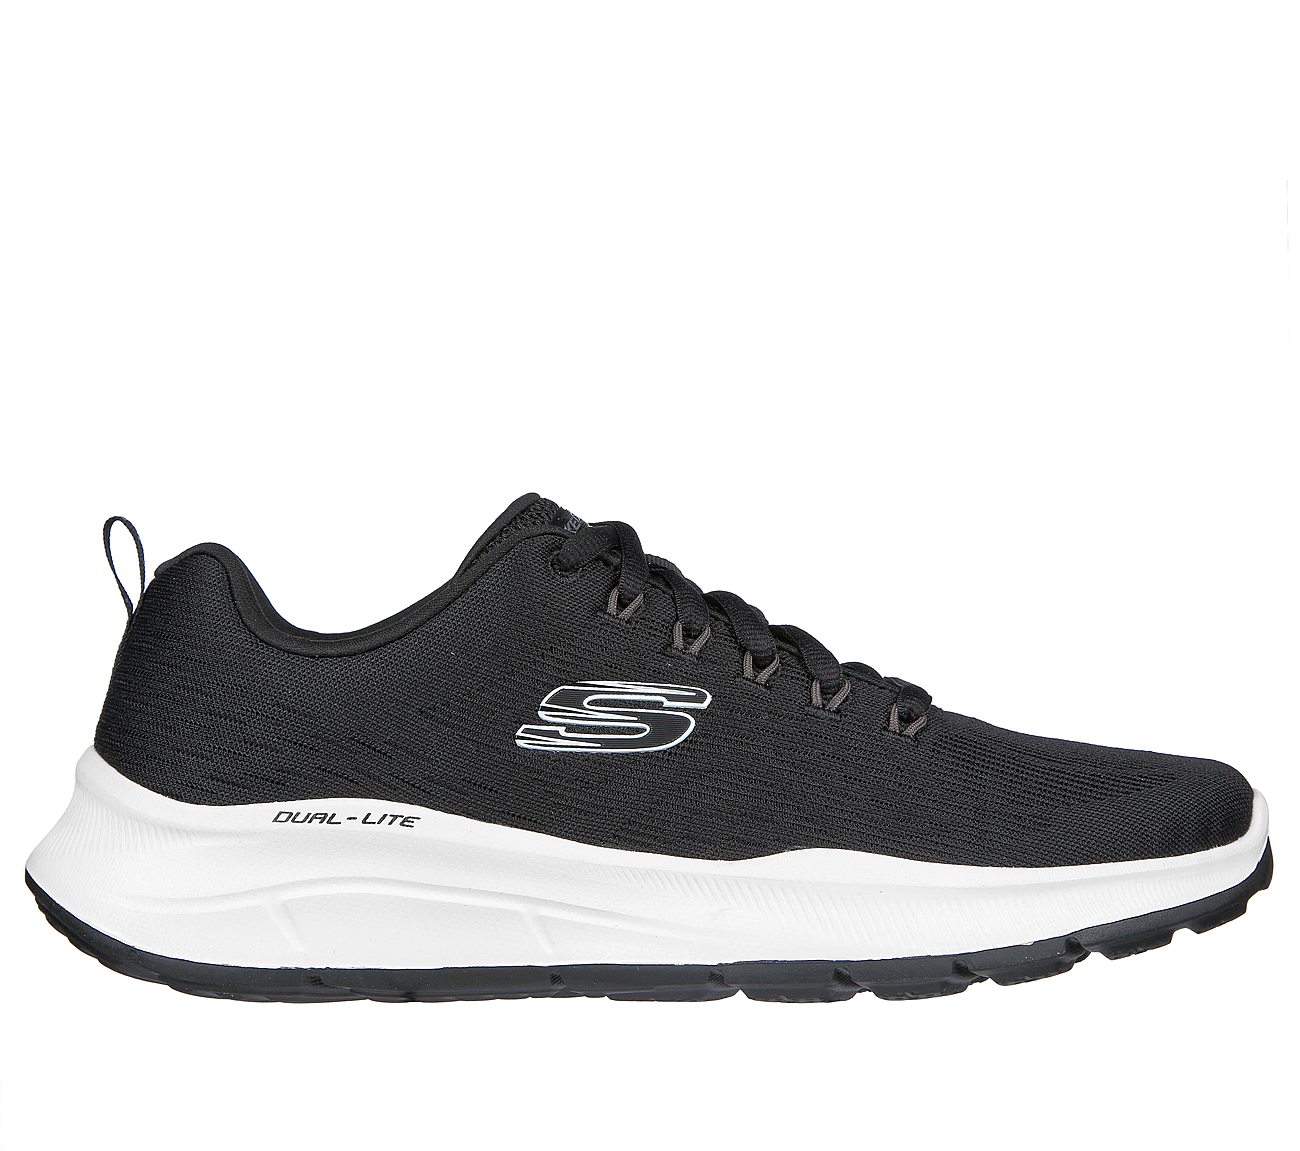 EQUALIZER 5, BLACK/WHITE Footwear Lateral View